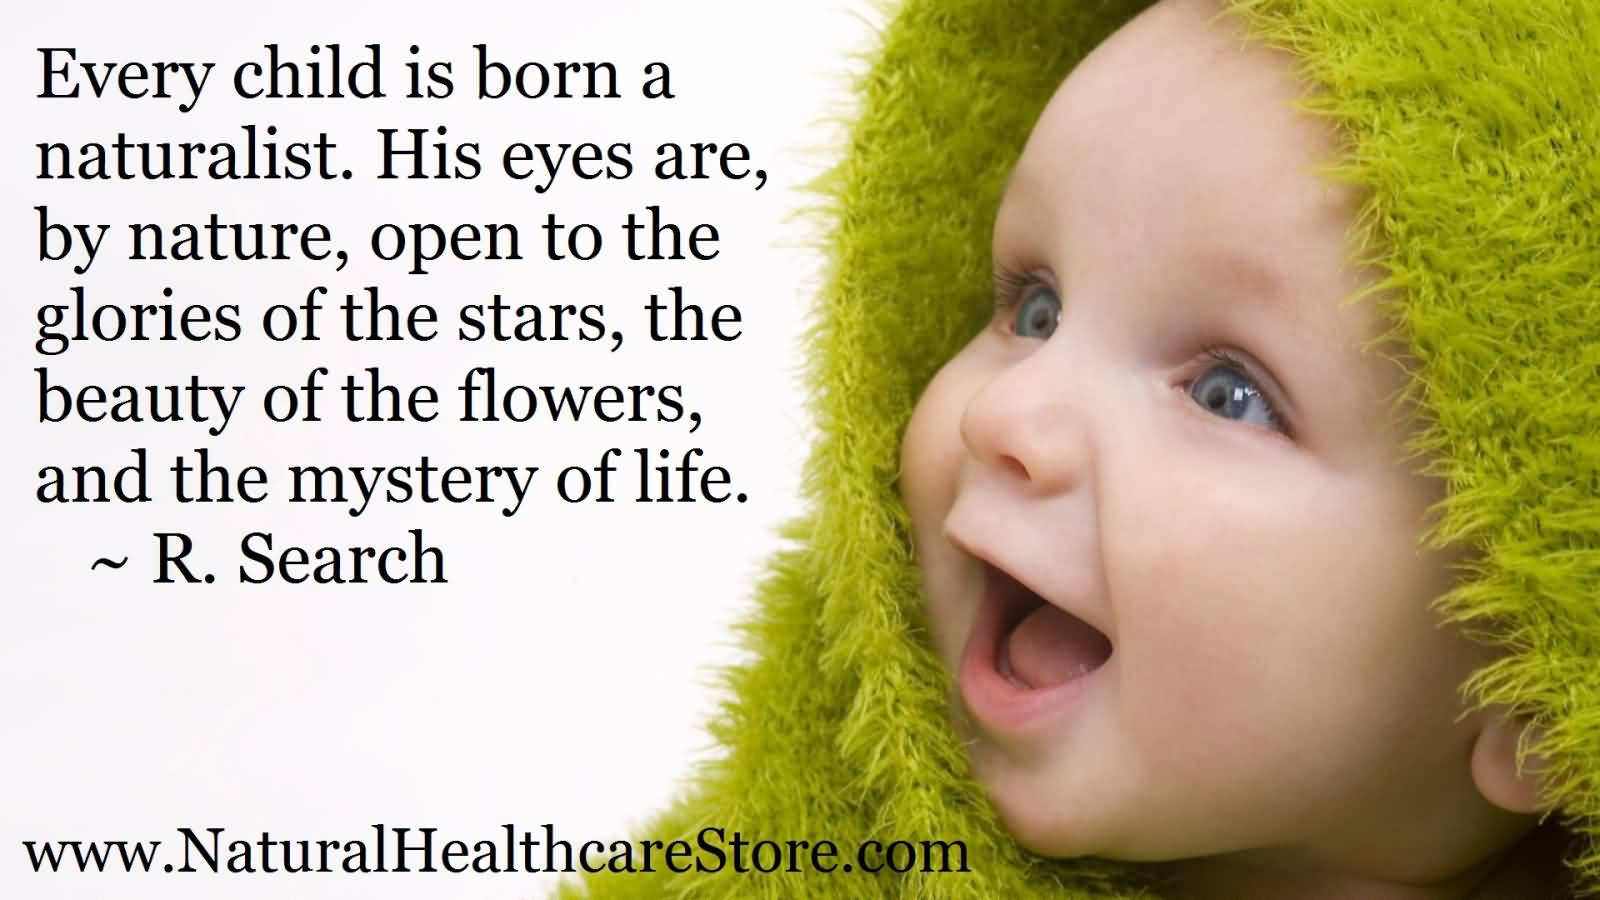 Every child is born a naturalist. His eyes are, by nature, open to the glories of the stars, the beauty of the flowers, and the mystery of life.